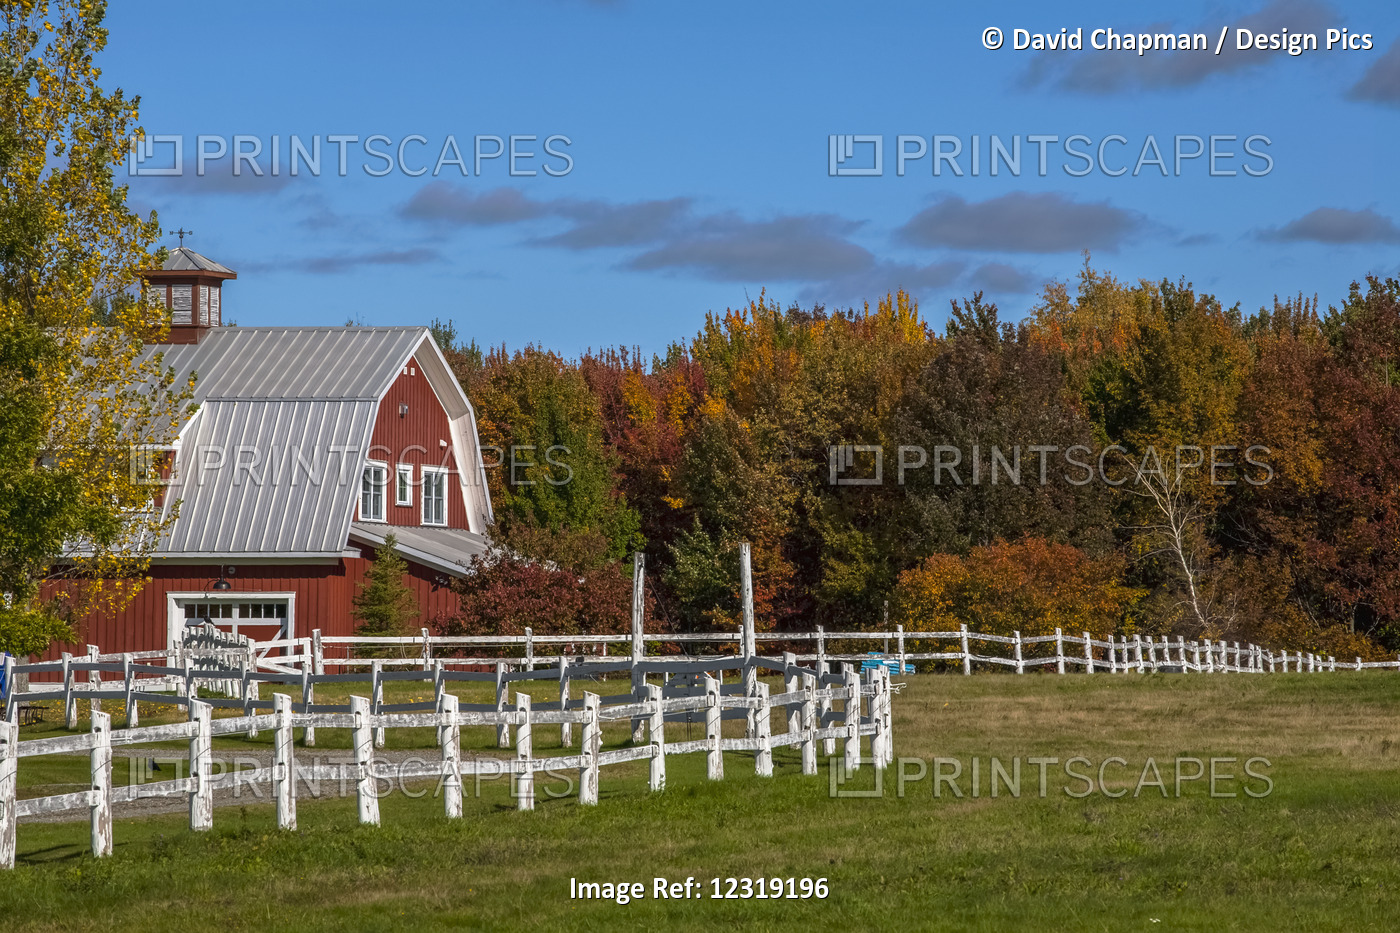 The white fence by the red barn